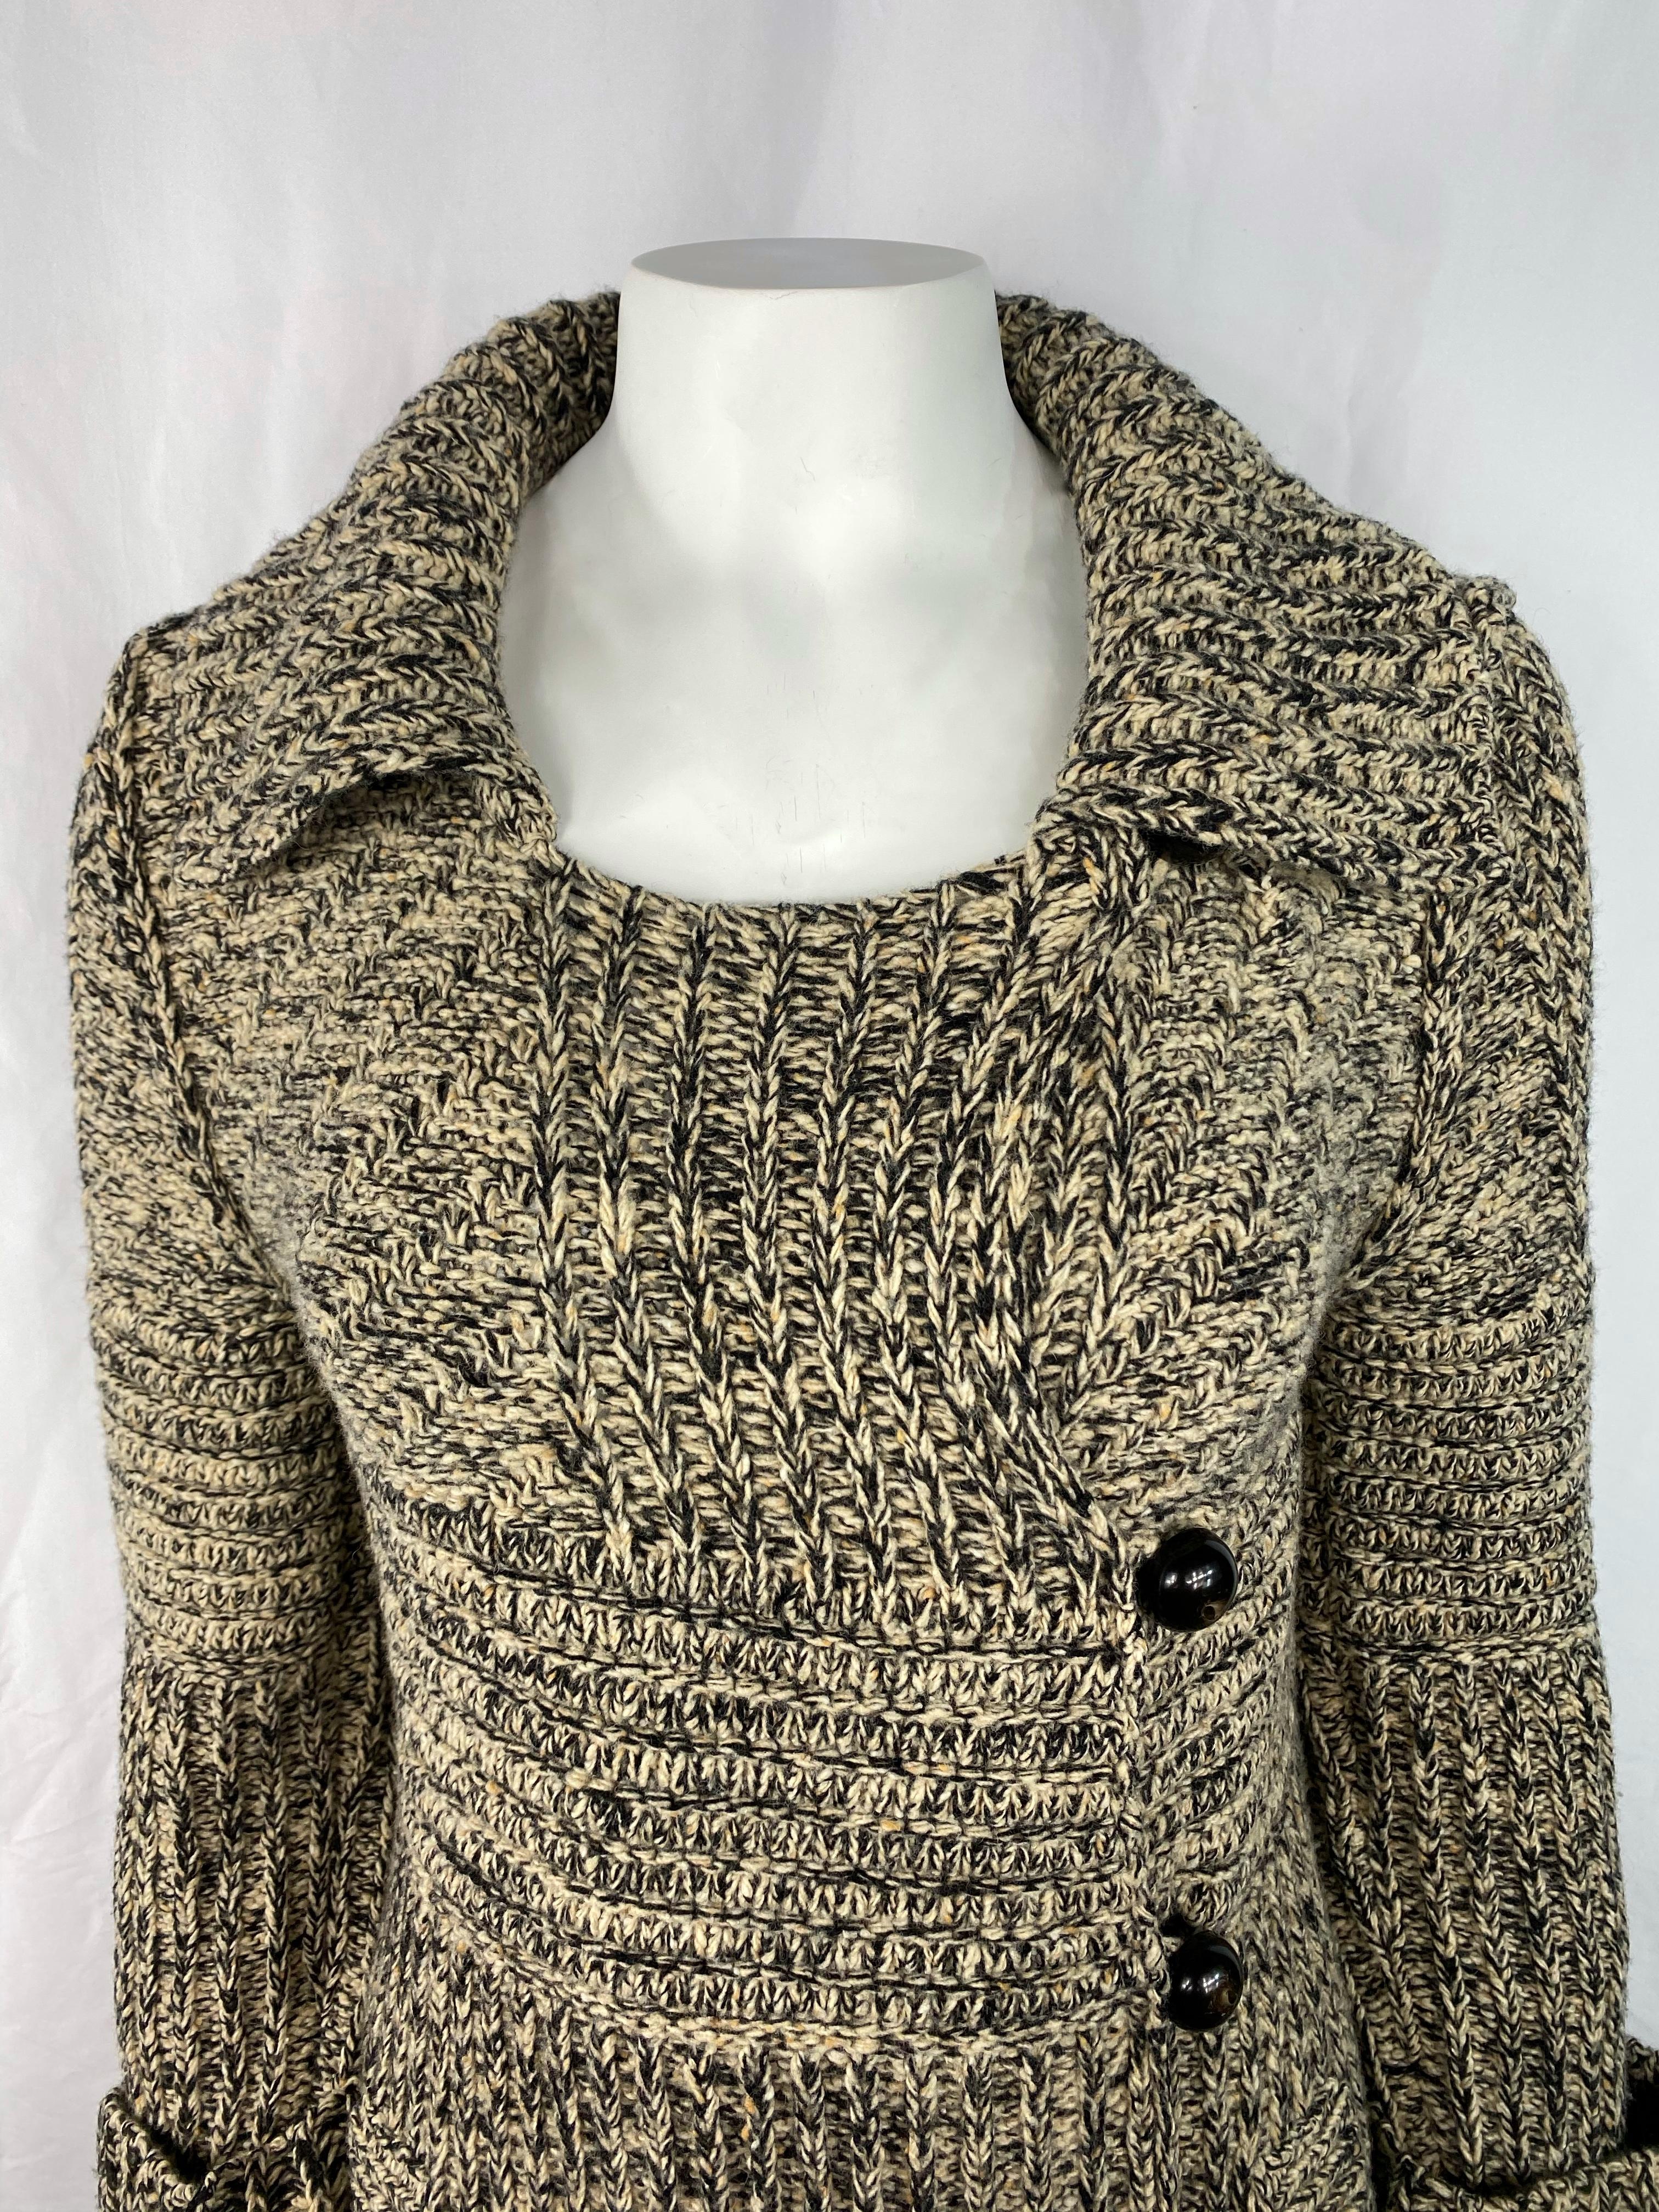 Product details:

The set is designed by Sonia Rykiel in France, it features black and light brown/ beige color palette. 
The cardigan is size 38, it features front button closure, collar detail and pockets on the sides.
Measurements: 37